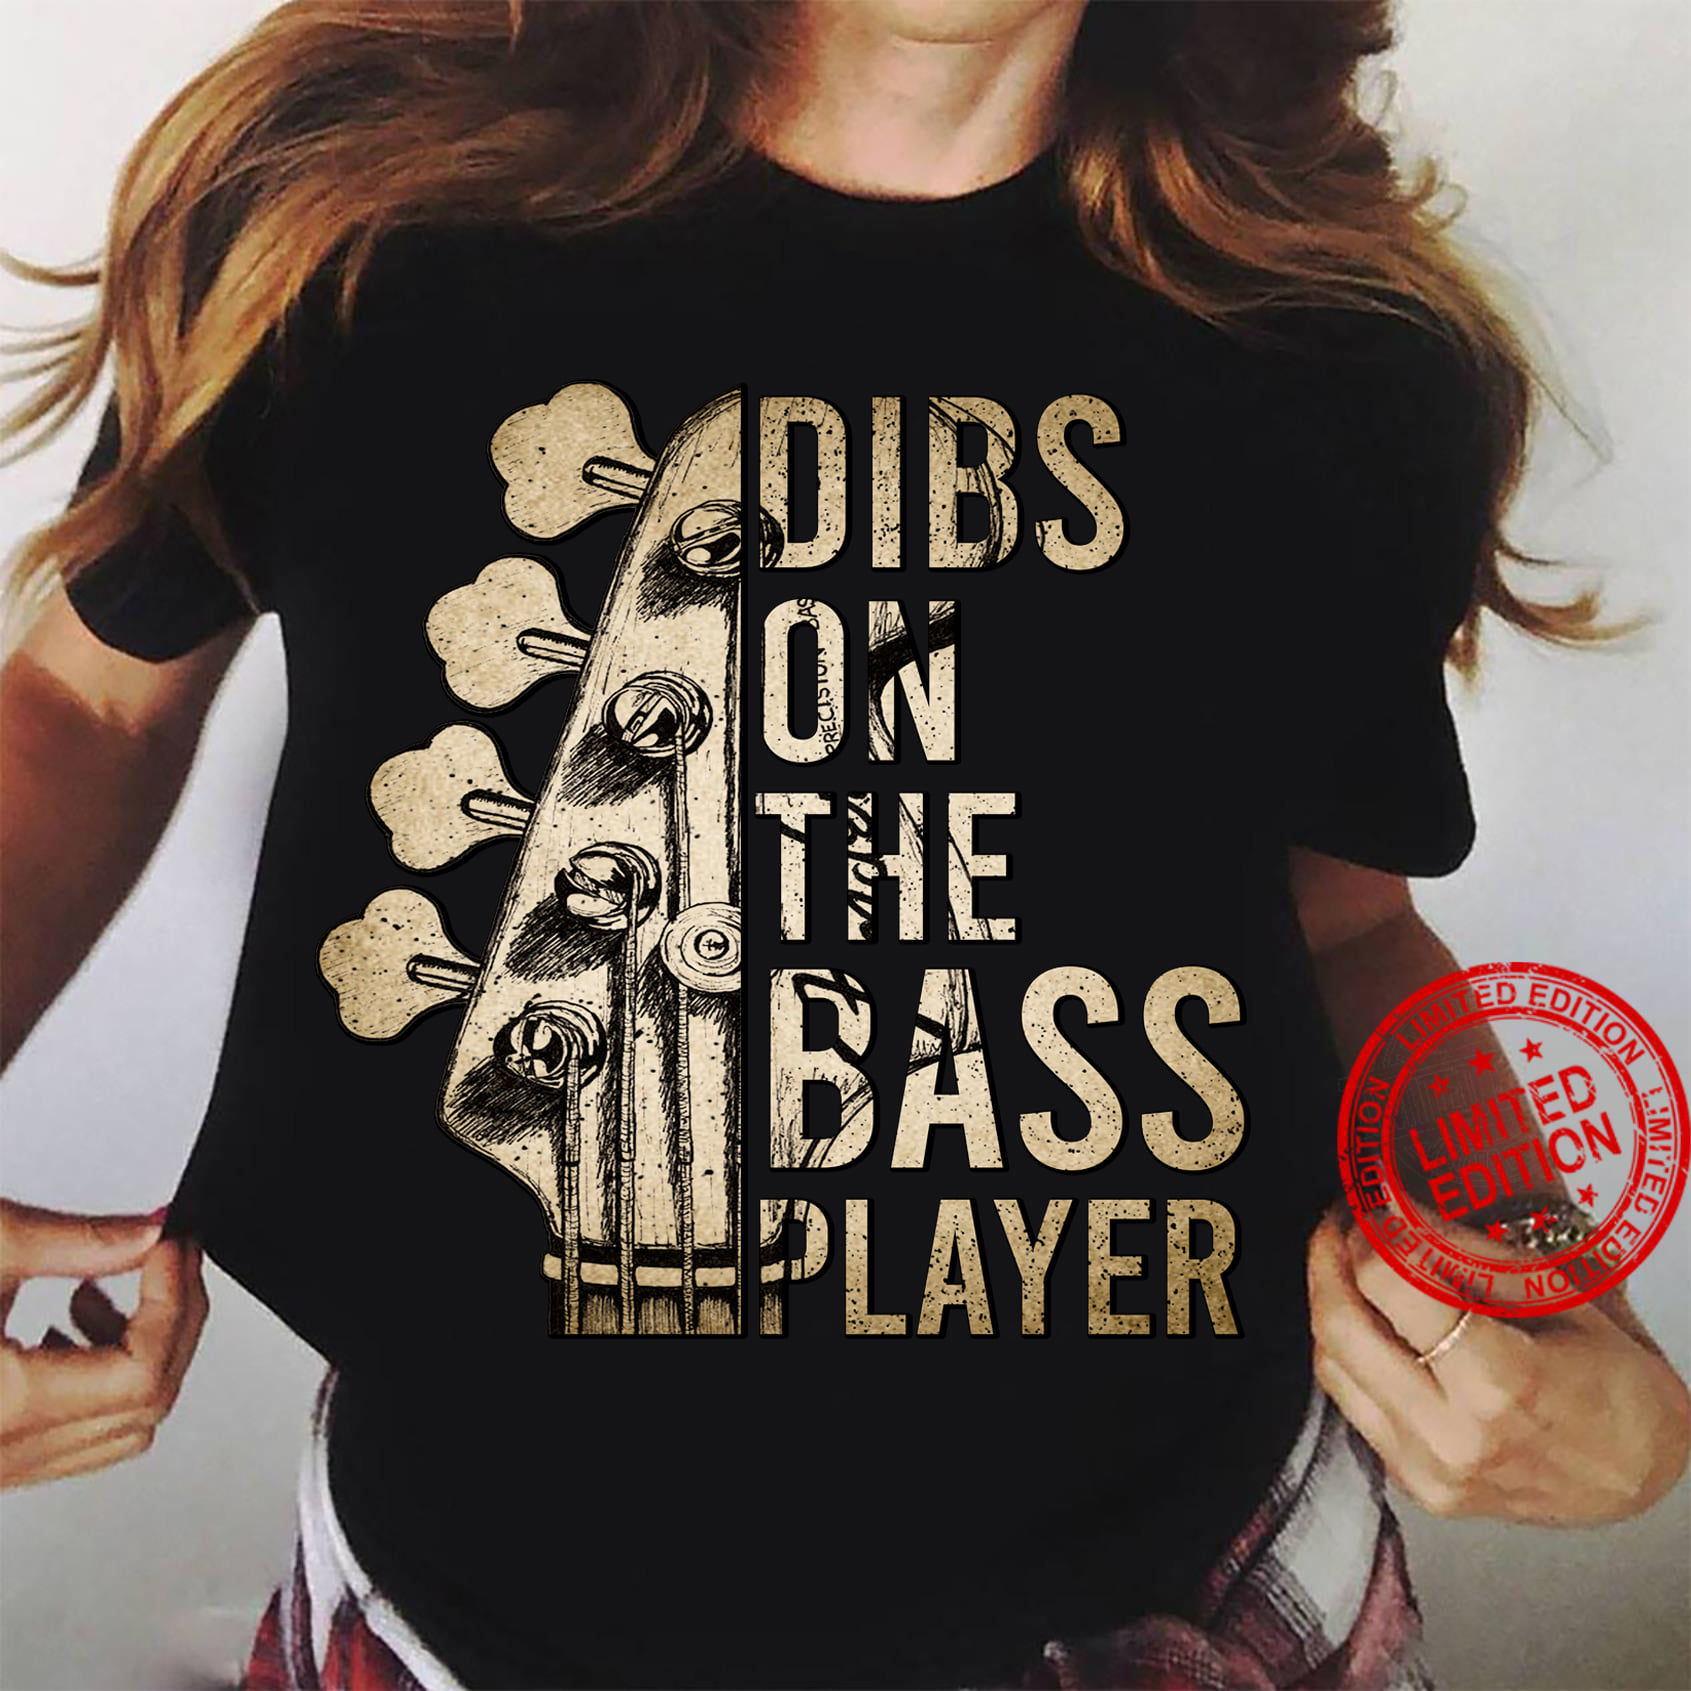 Dibs on the bass player - Guitar lover, the guitarist